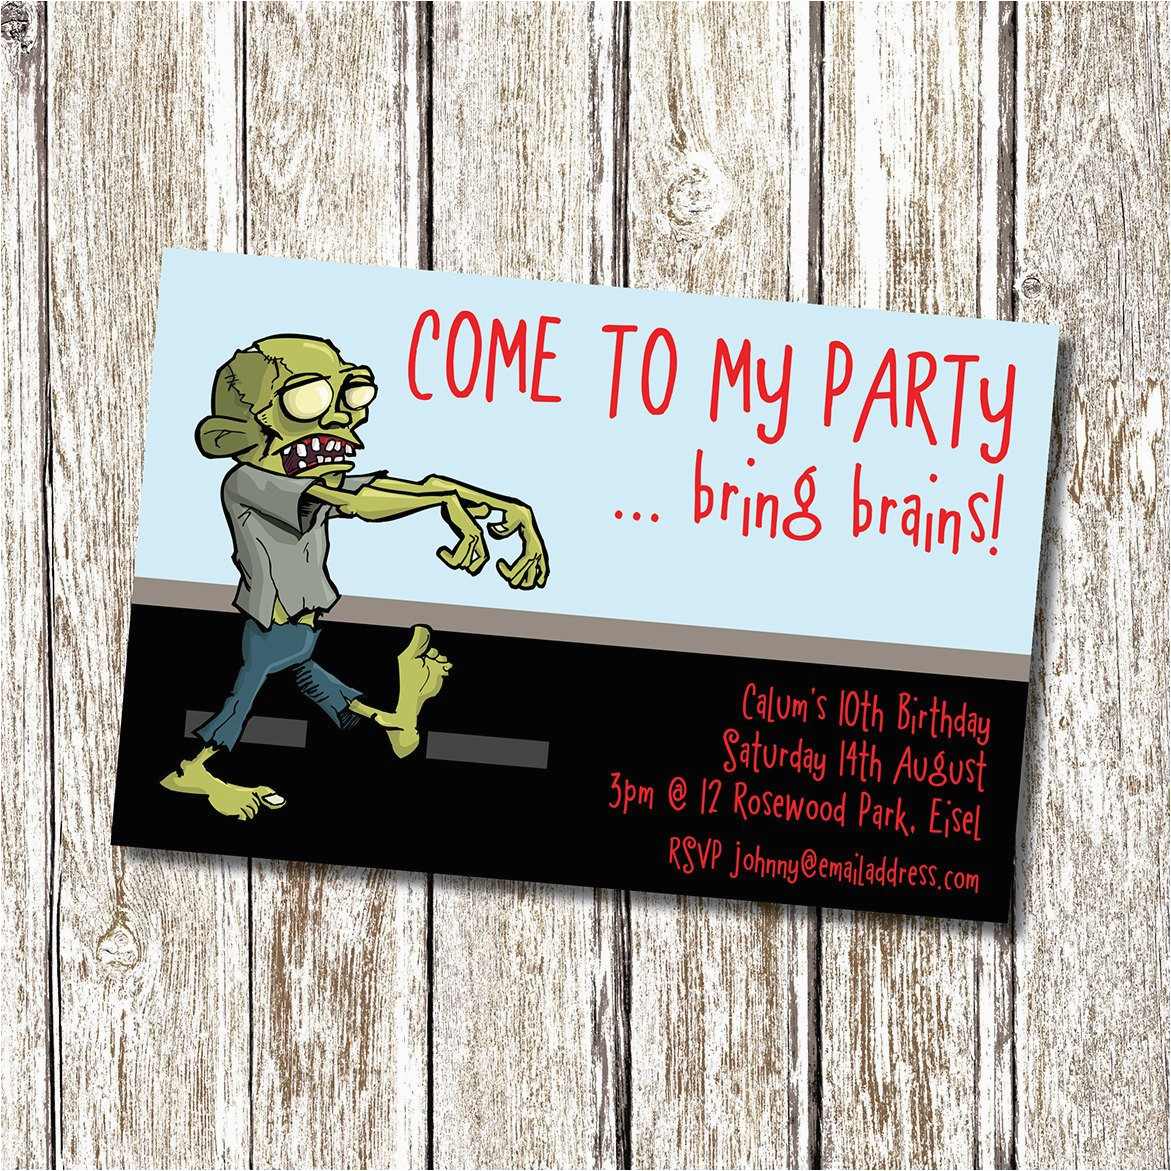 Zombie Birthday Party Invitations Zombie Birthday Party Invitation Printable and Personalised